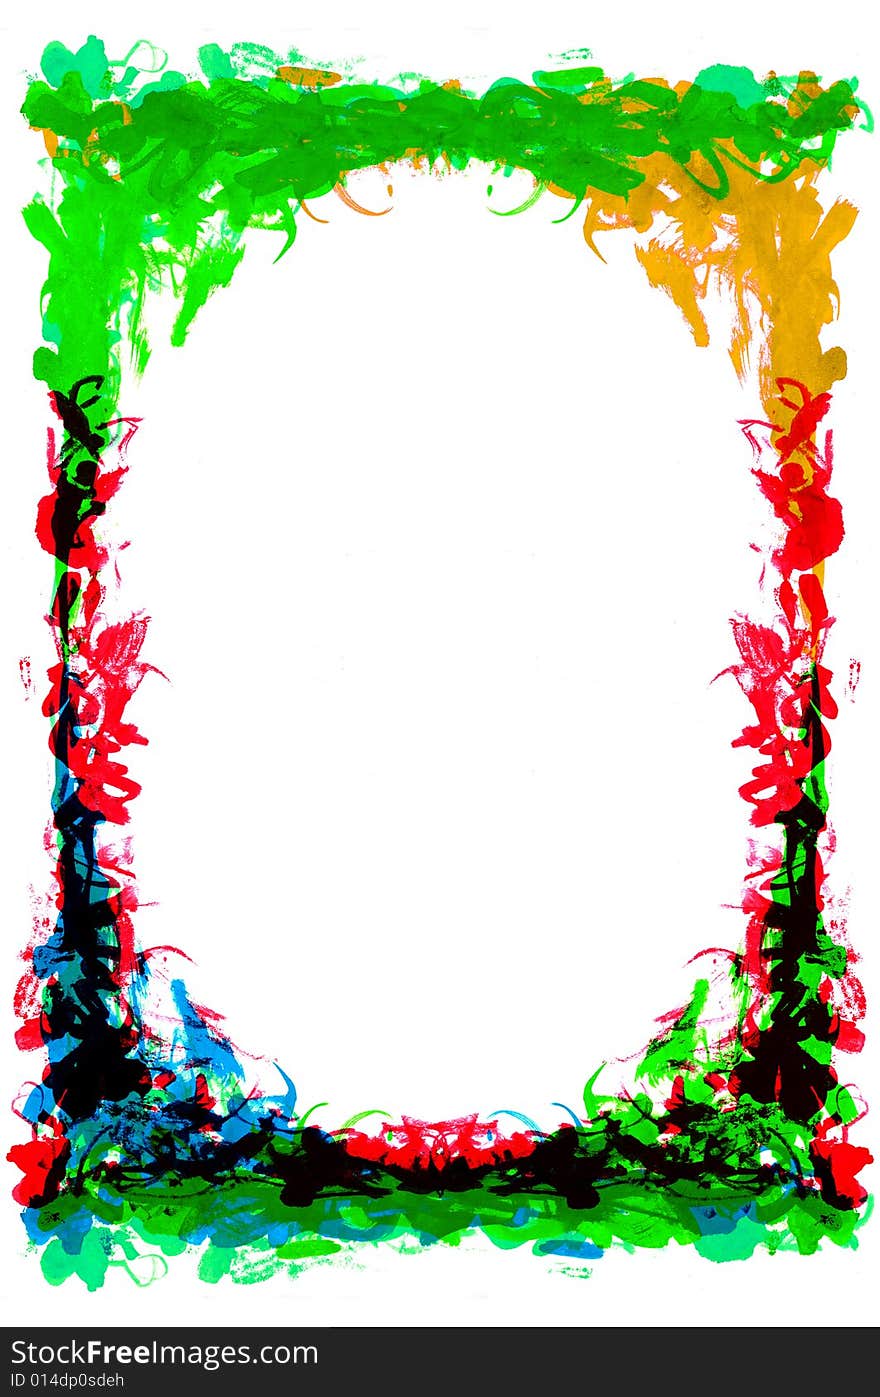 A sketch style colorful frame